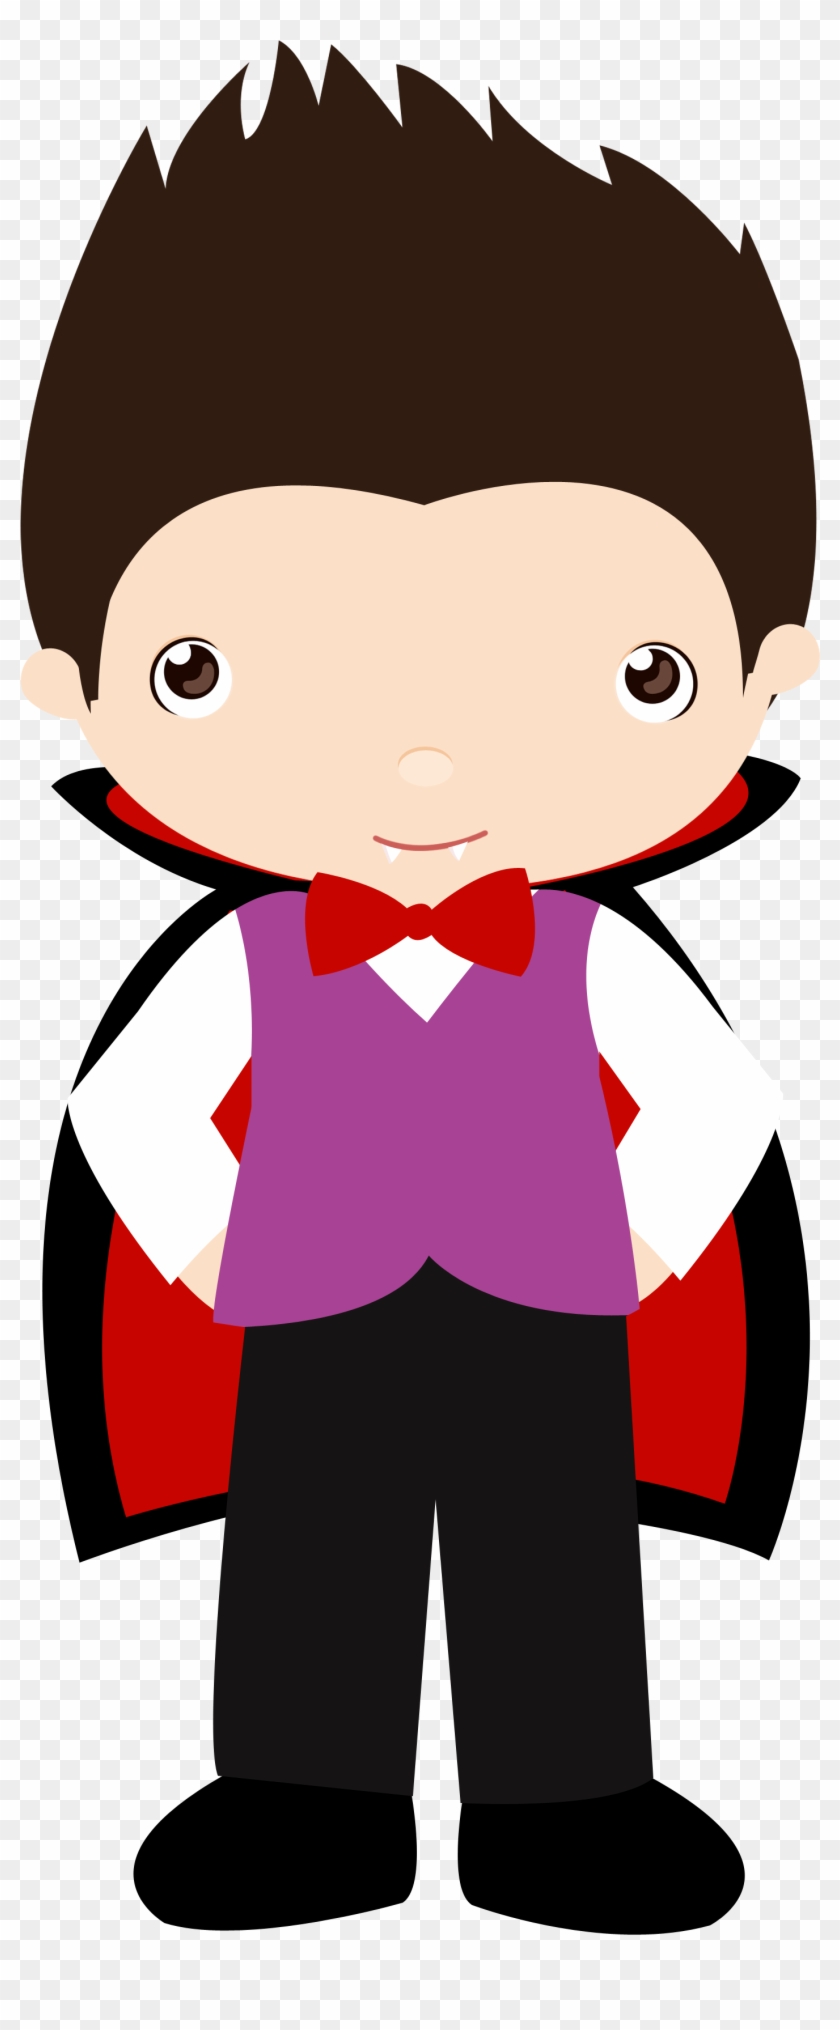 Dracula Clipart Gothic - Gothic Character Clip Art #158867